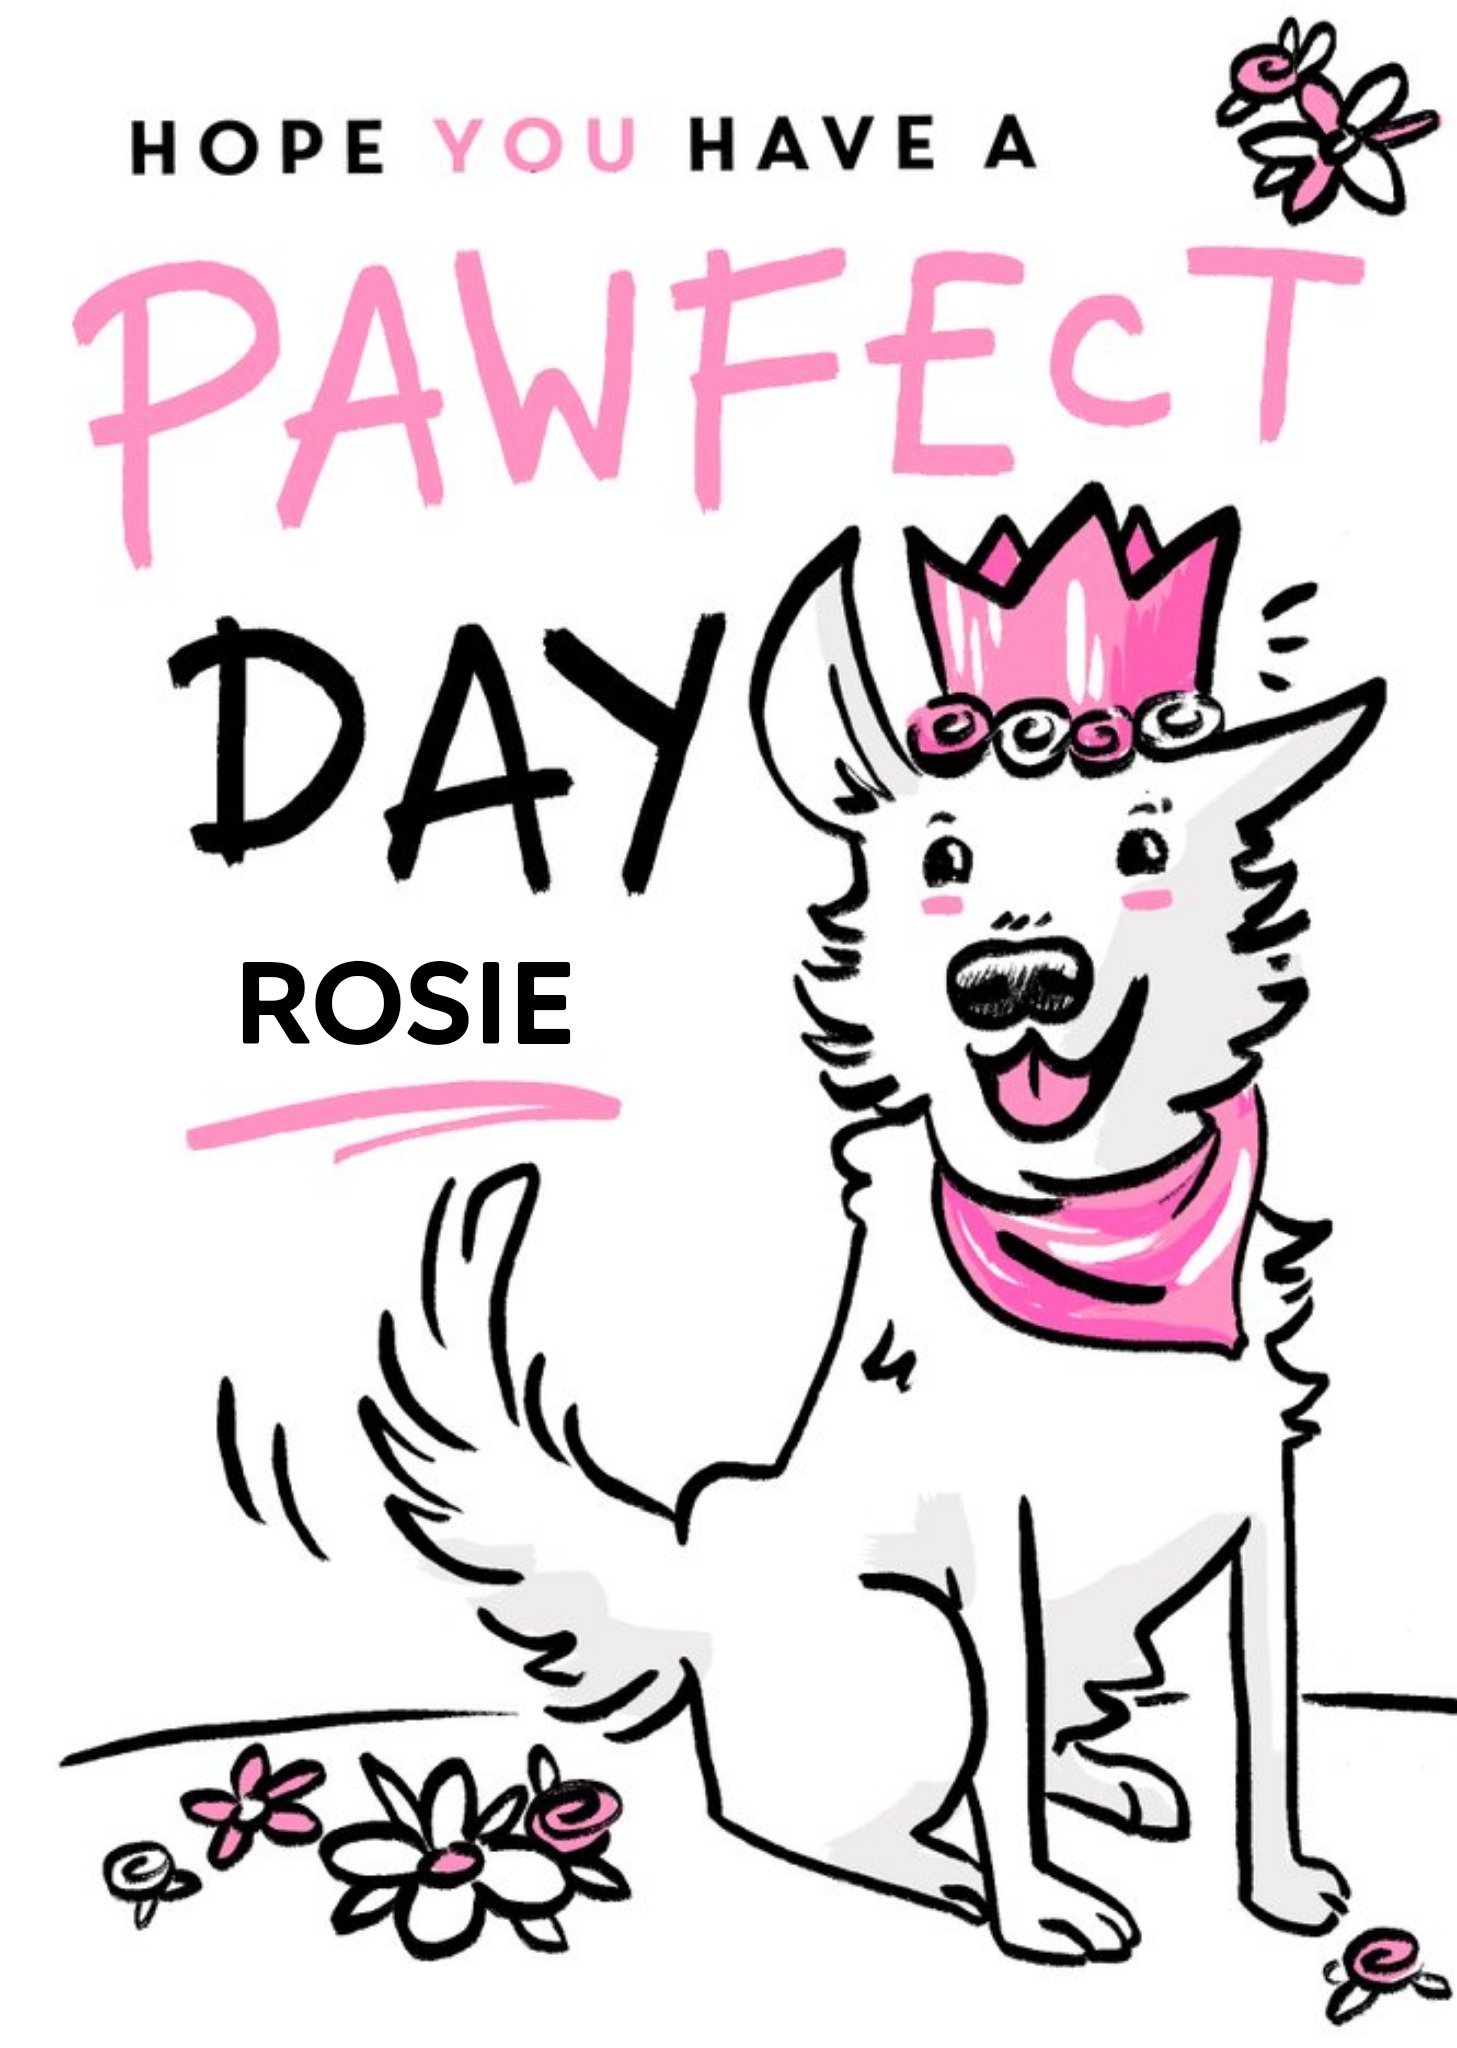 Moonpig Pawfect Day Birthday Card Featuring An Illustration Of Rosie The Dog, Large